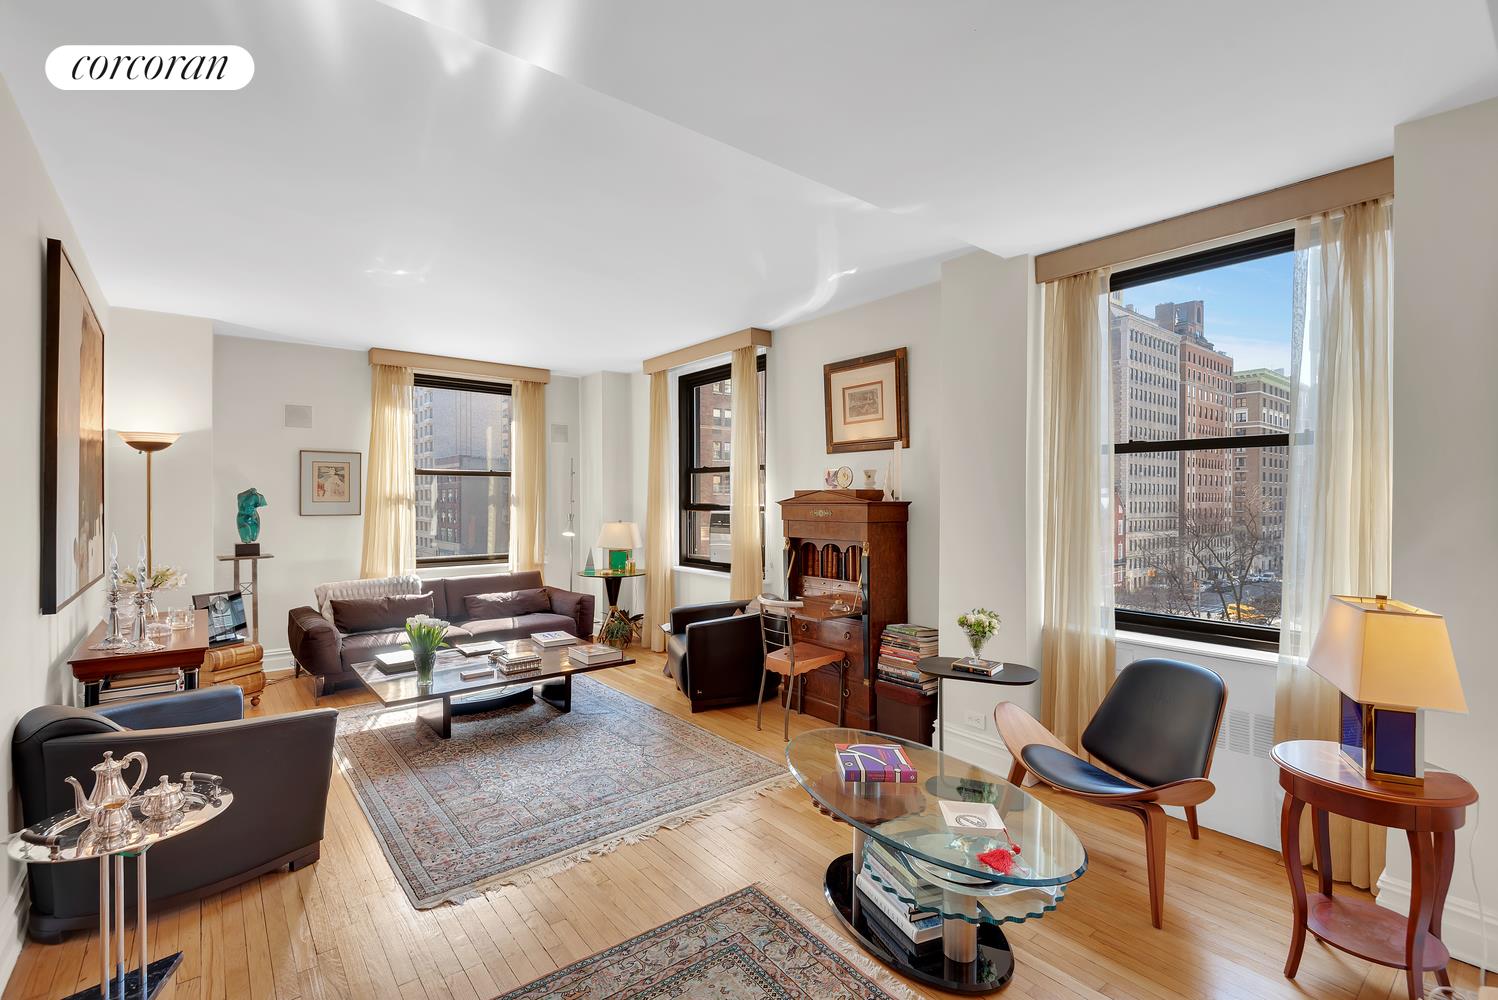 1040 Park Avenue 5Dh, Carnegie Hill, Upper East Side, NYC - 4 Bedrooms  
3 Bathrooms  
8 Rooms - 